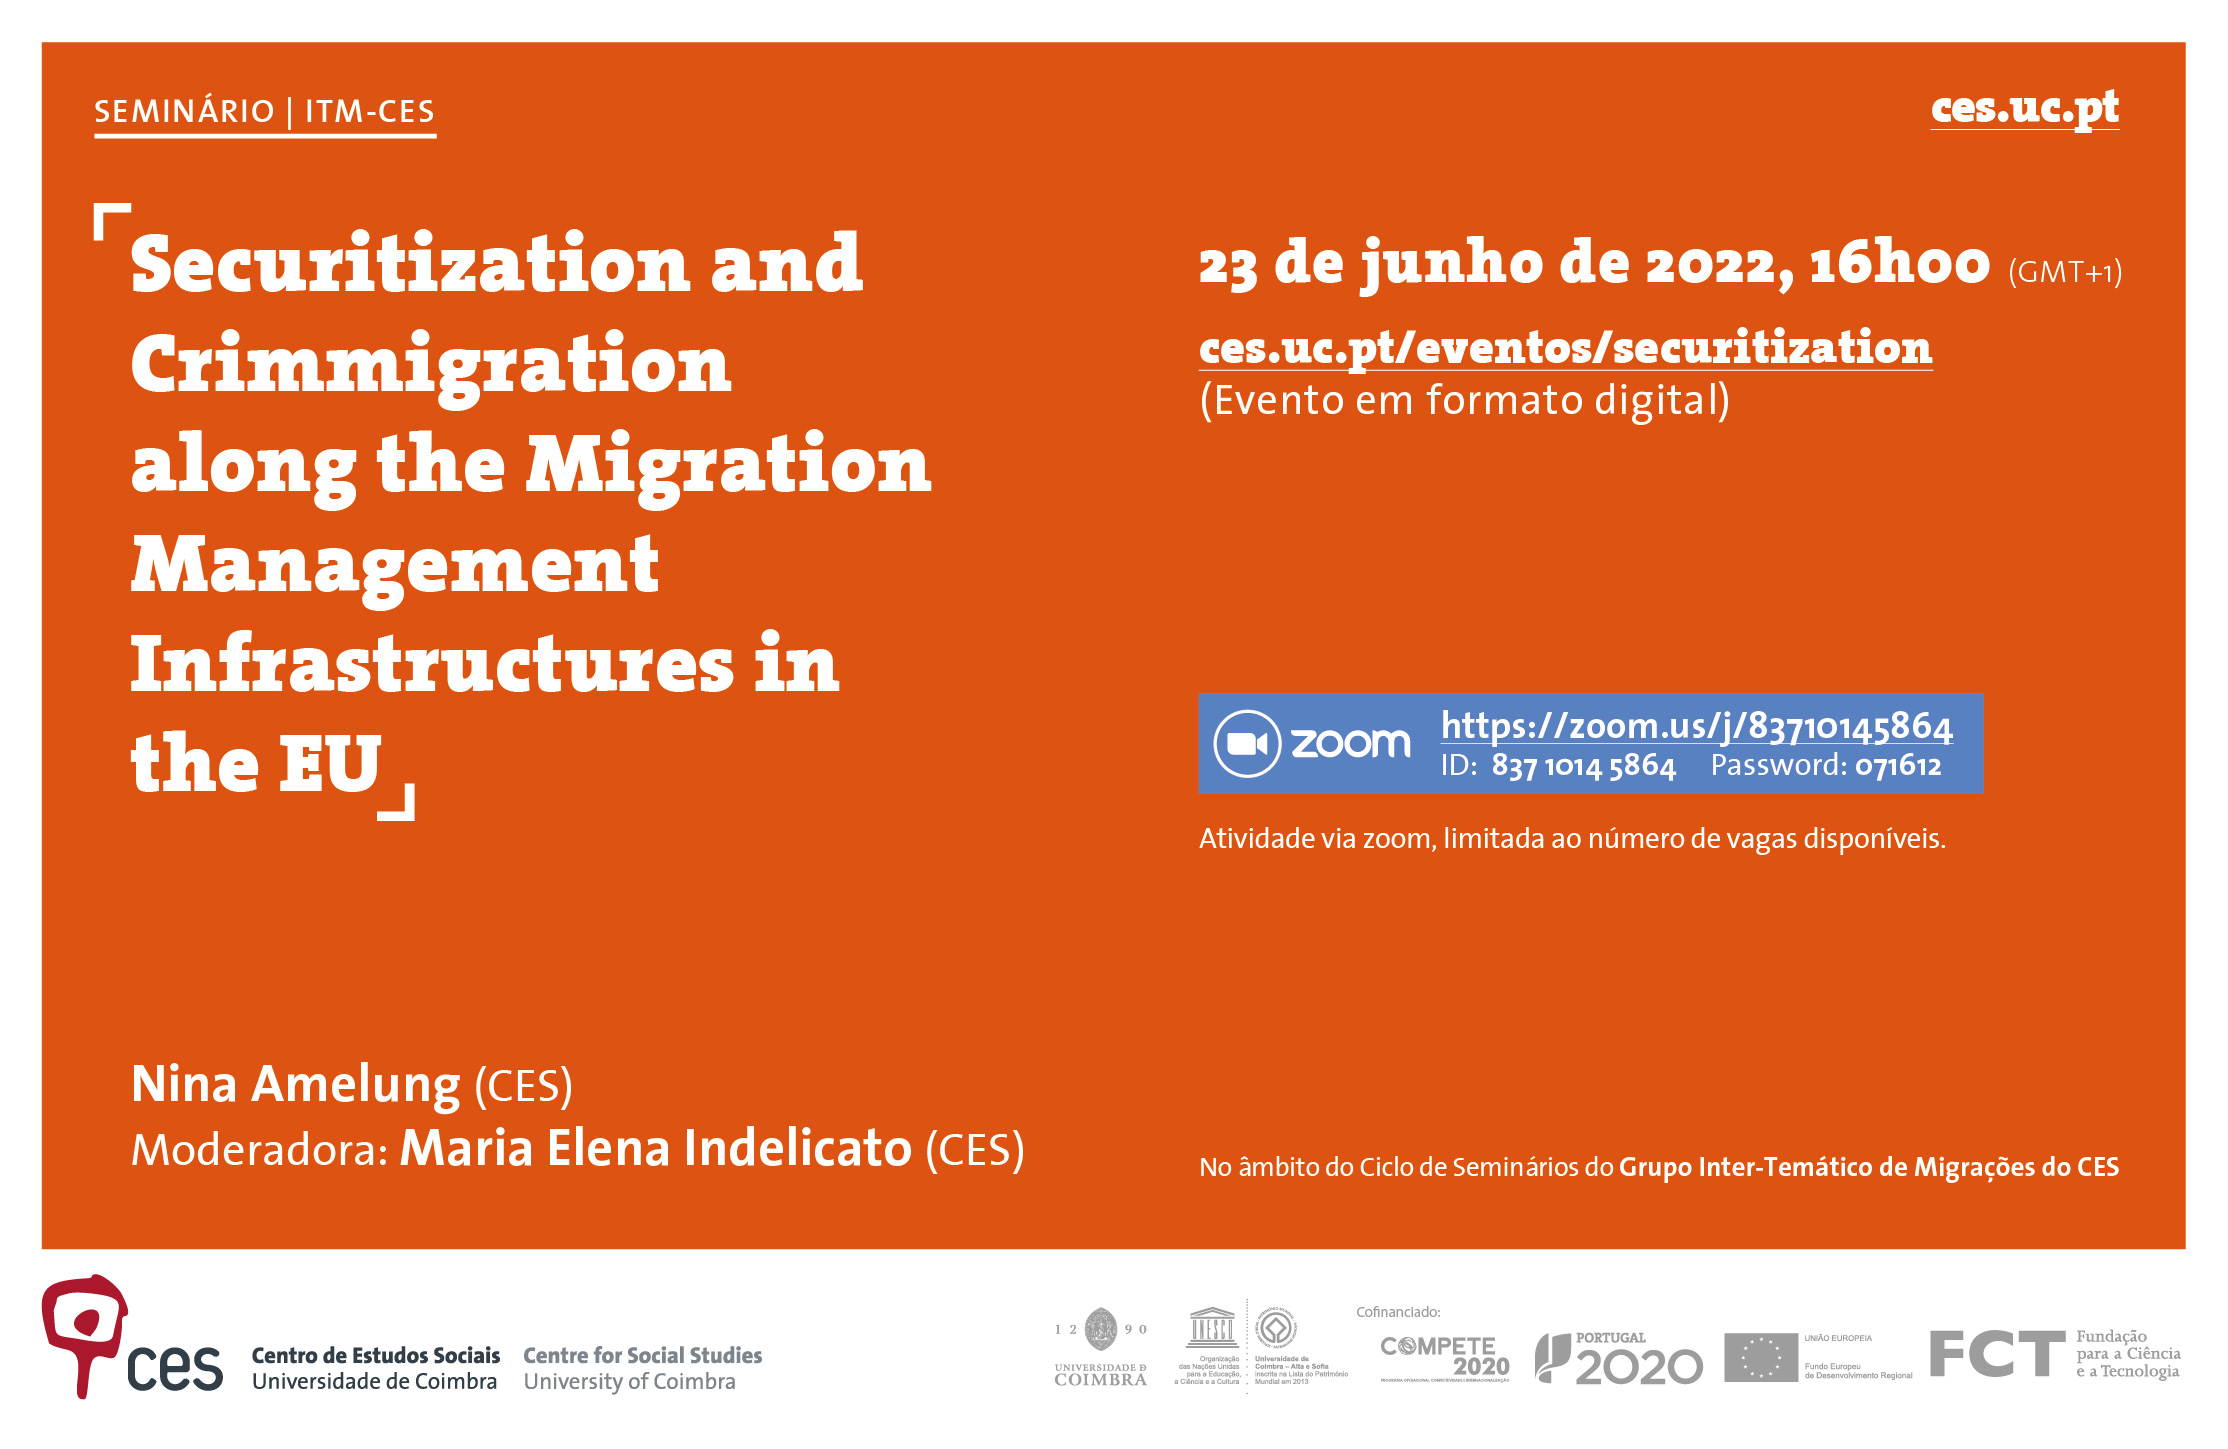 Securitization and Crimmigration along the Migration Management Infrastructures in the EU<span id="edit_39135"><script>$(function() { $('#edit_39135').load( "/myces/user/editobj.php?tipo=evento&id=39135" ); });</script></span>